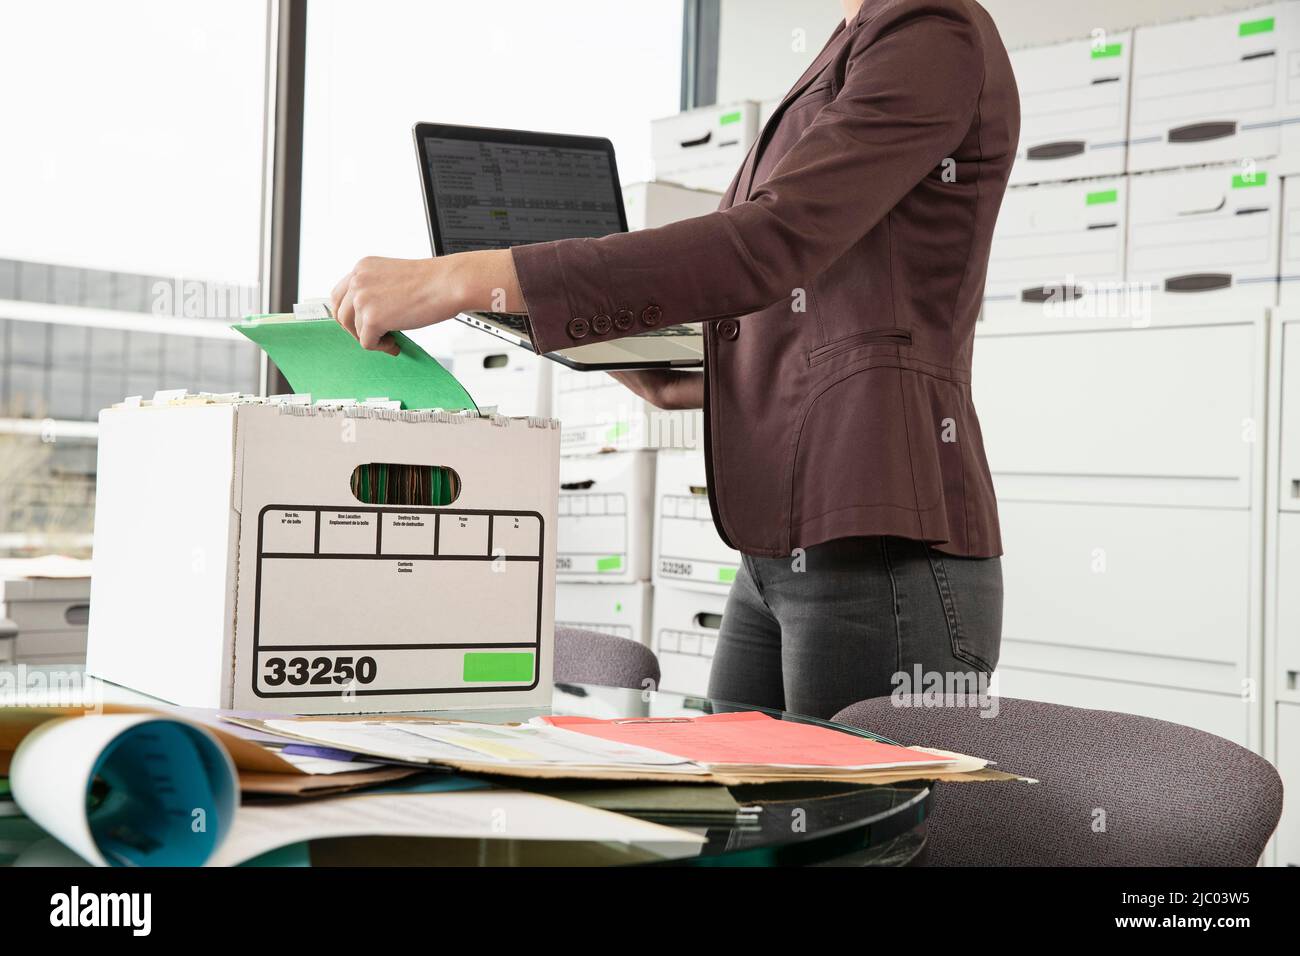 Tight shot of a woman holding a laptop sorting through a box. Stock Photo